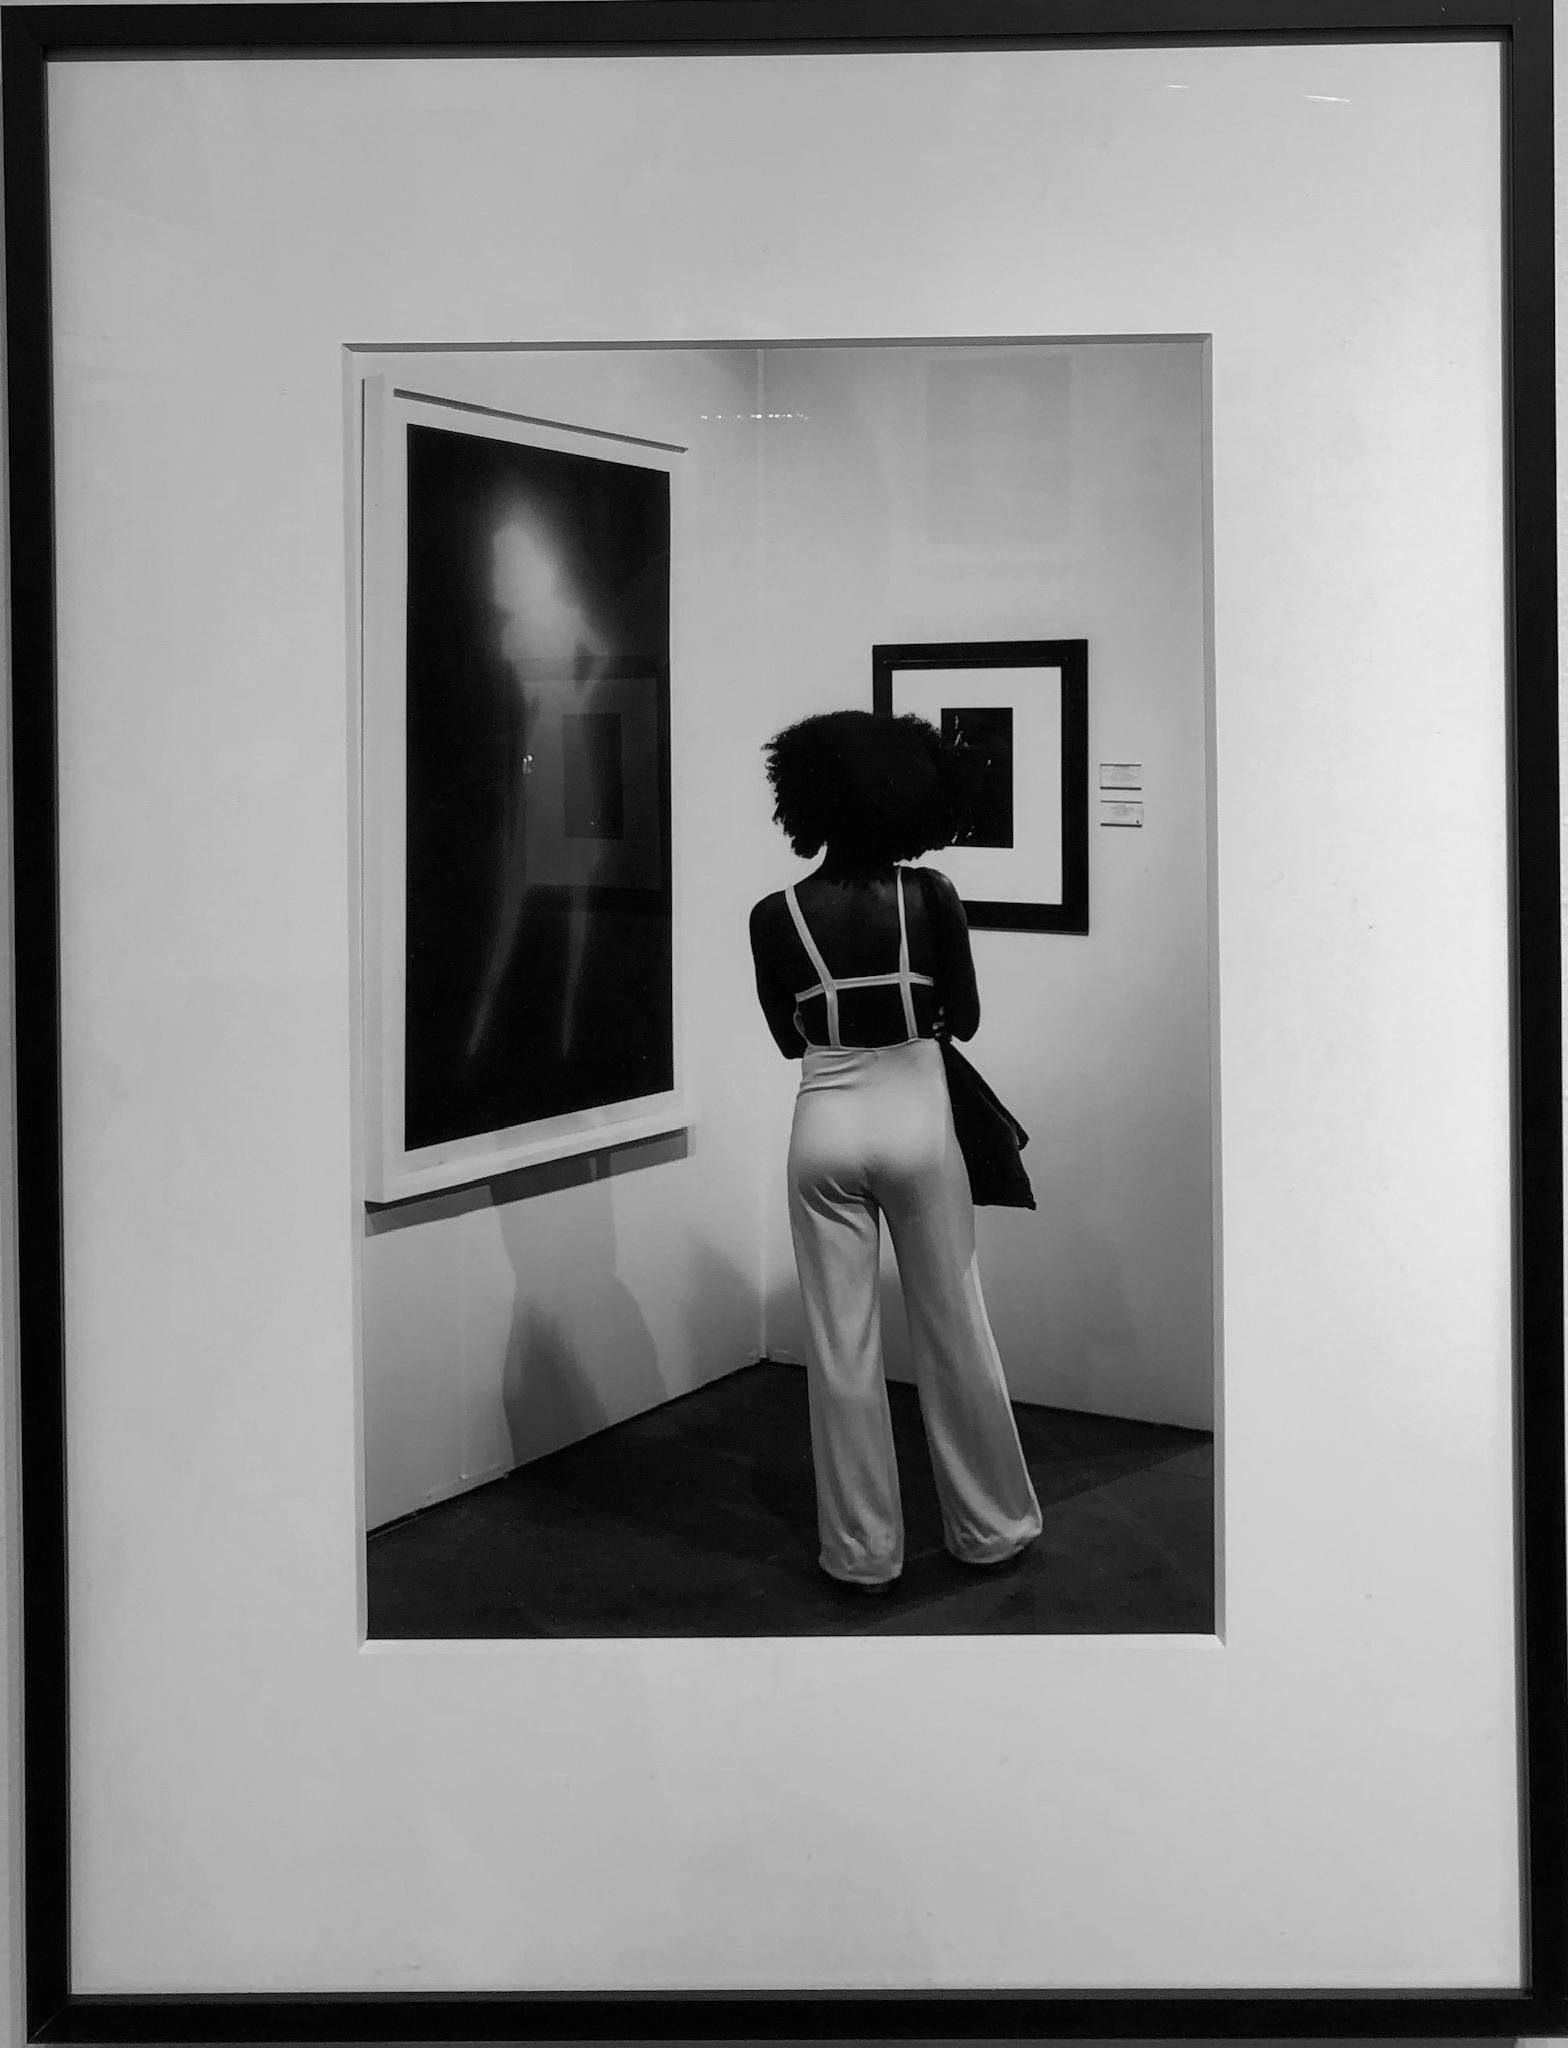 Woman and Art, Chicago, Framed Black and White Photo of Woman Looking at Art - Photograph by Kirill Polevoy